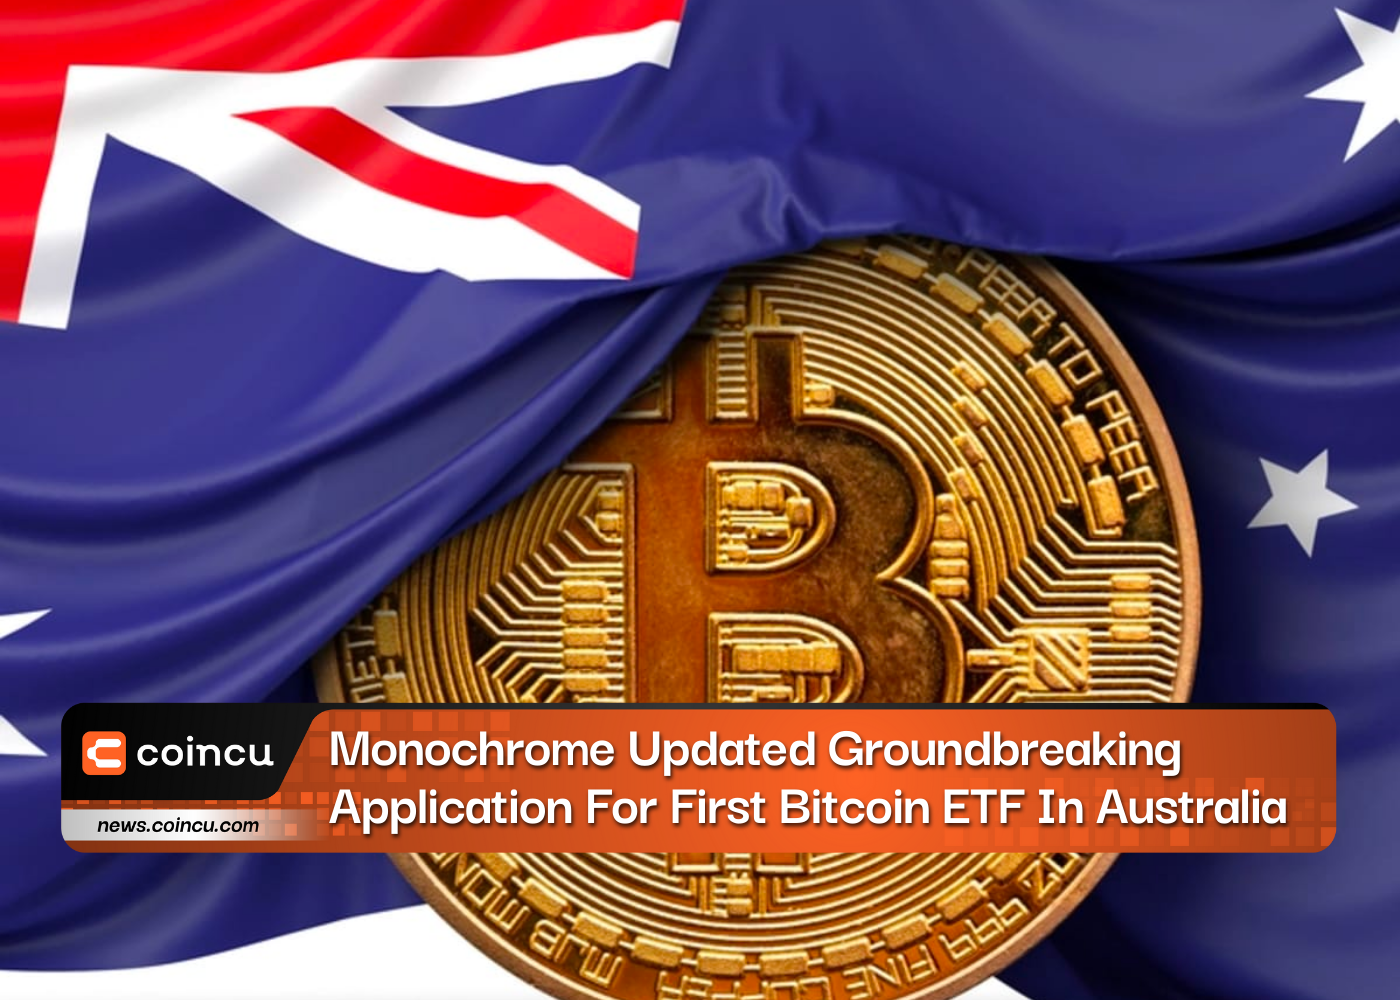 Monochrome Updated Groundbreaking Application For First Bitcoin ETF In Australia